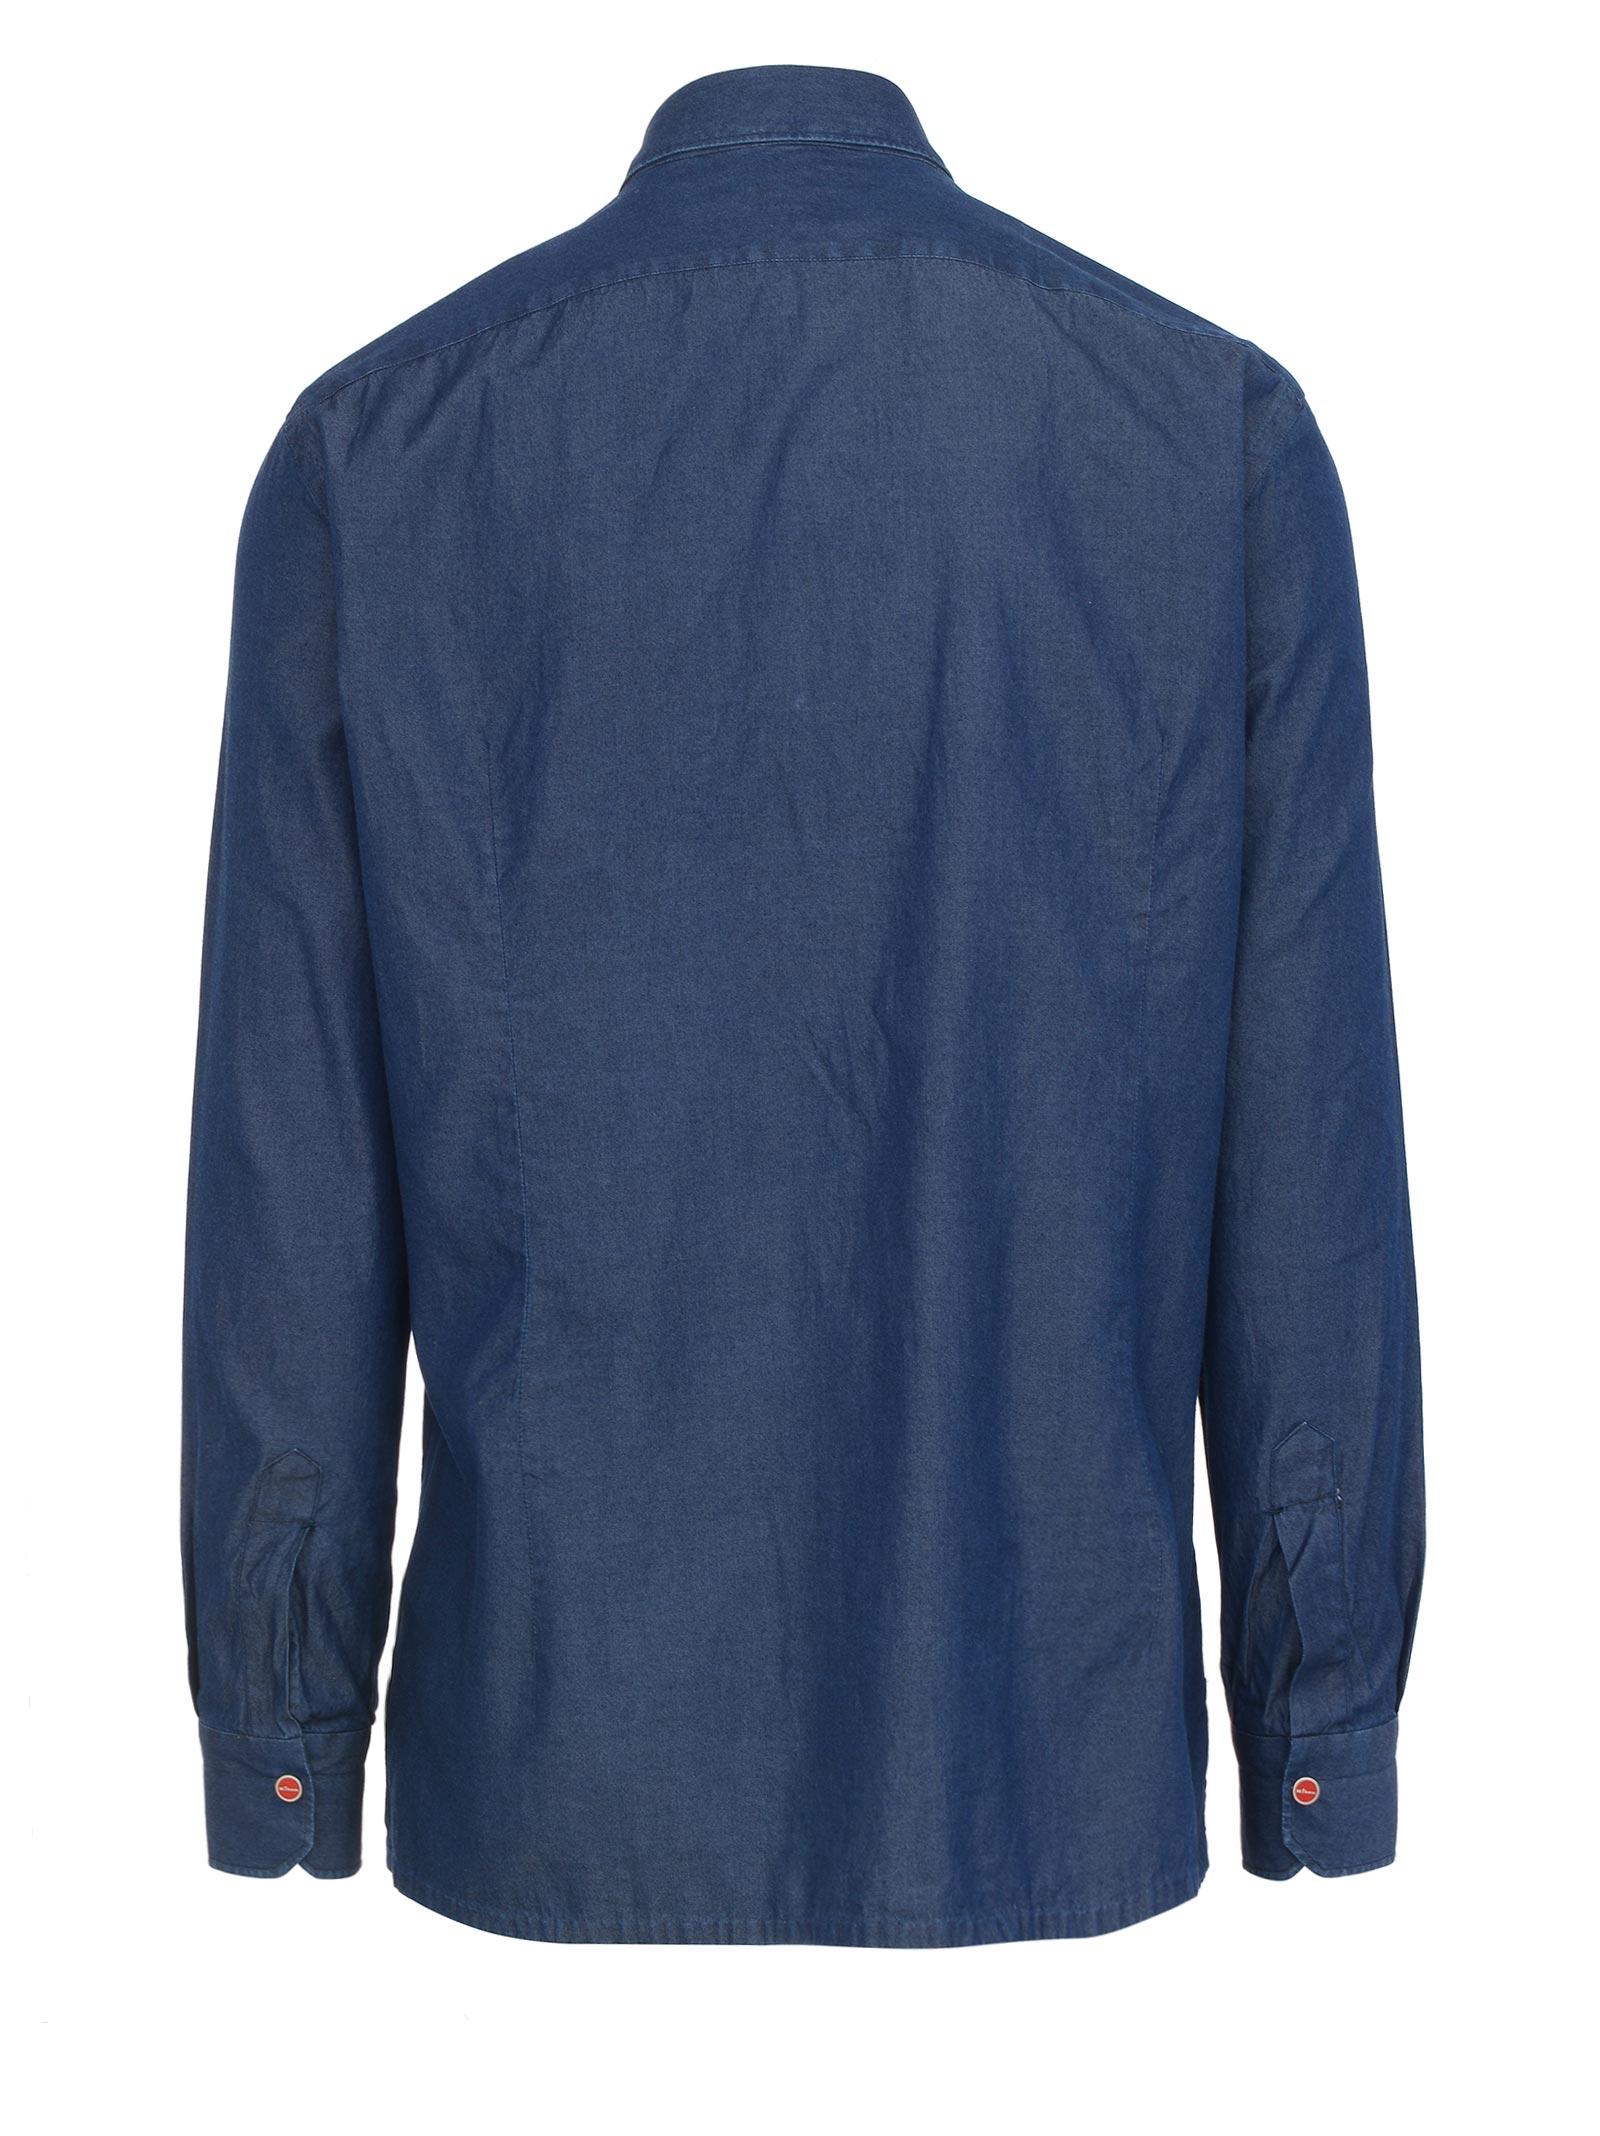 Kiton Blue Denim Shirt With Logoed Red Buttons And Patch Pocket On The  Chest. for Men | Lyst